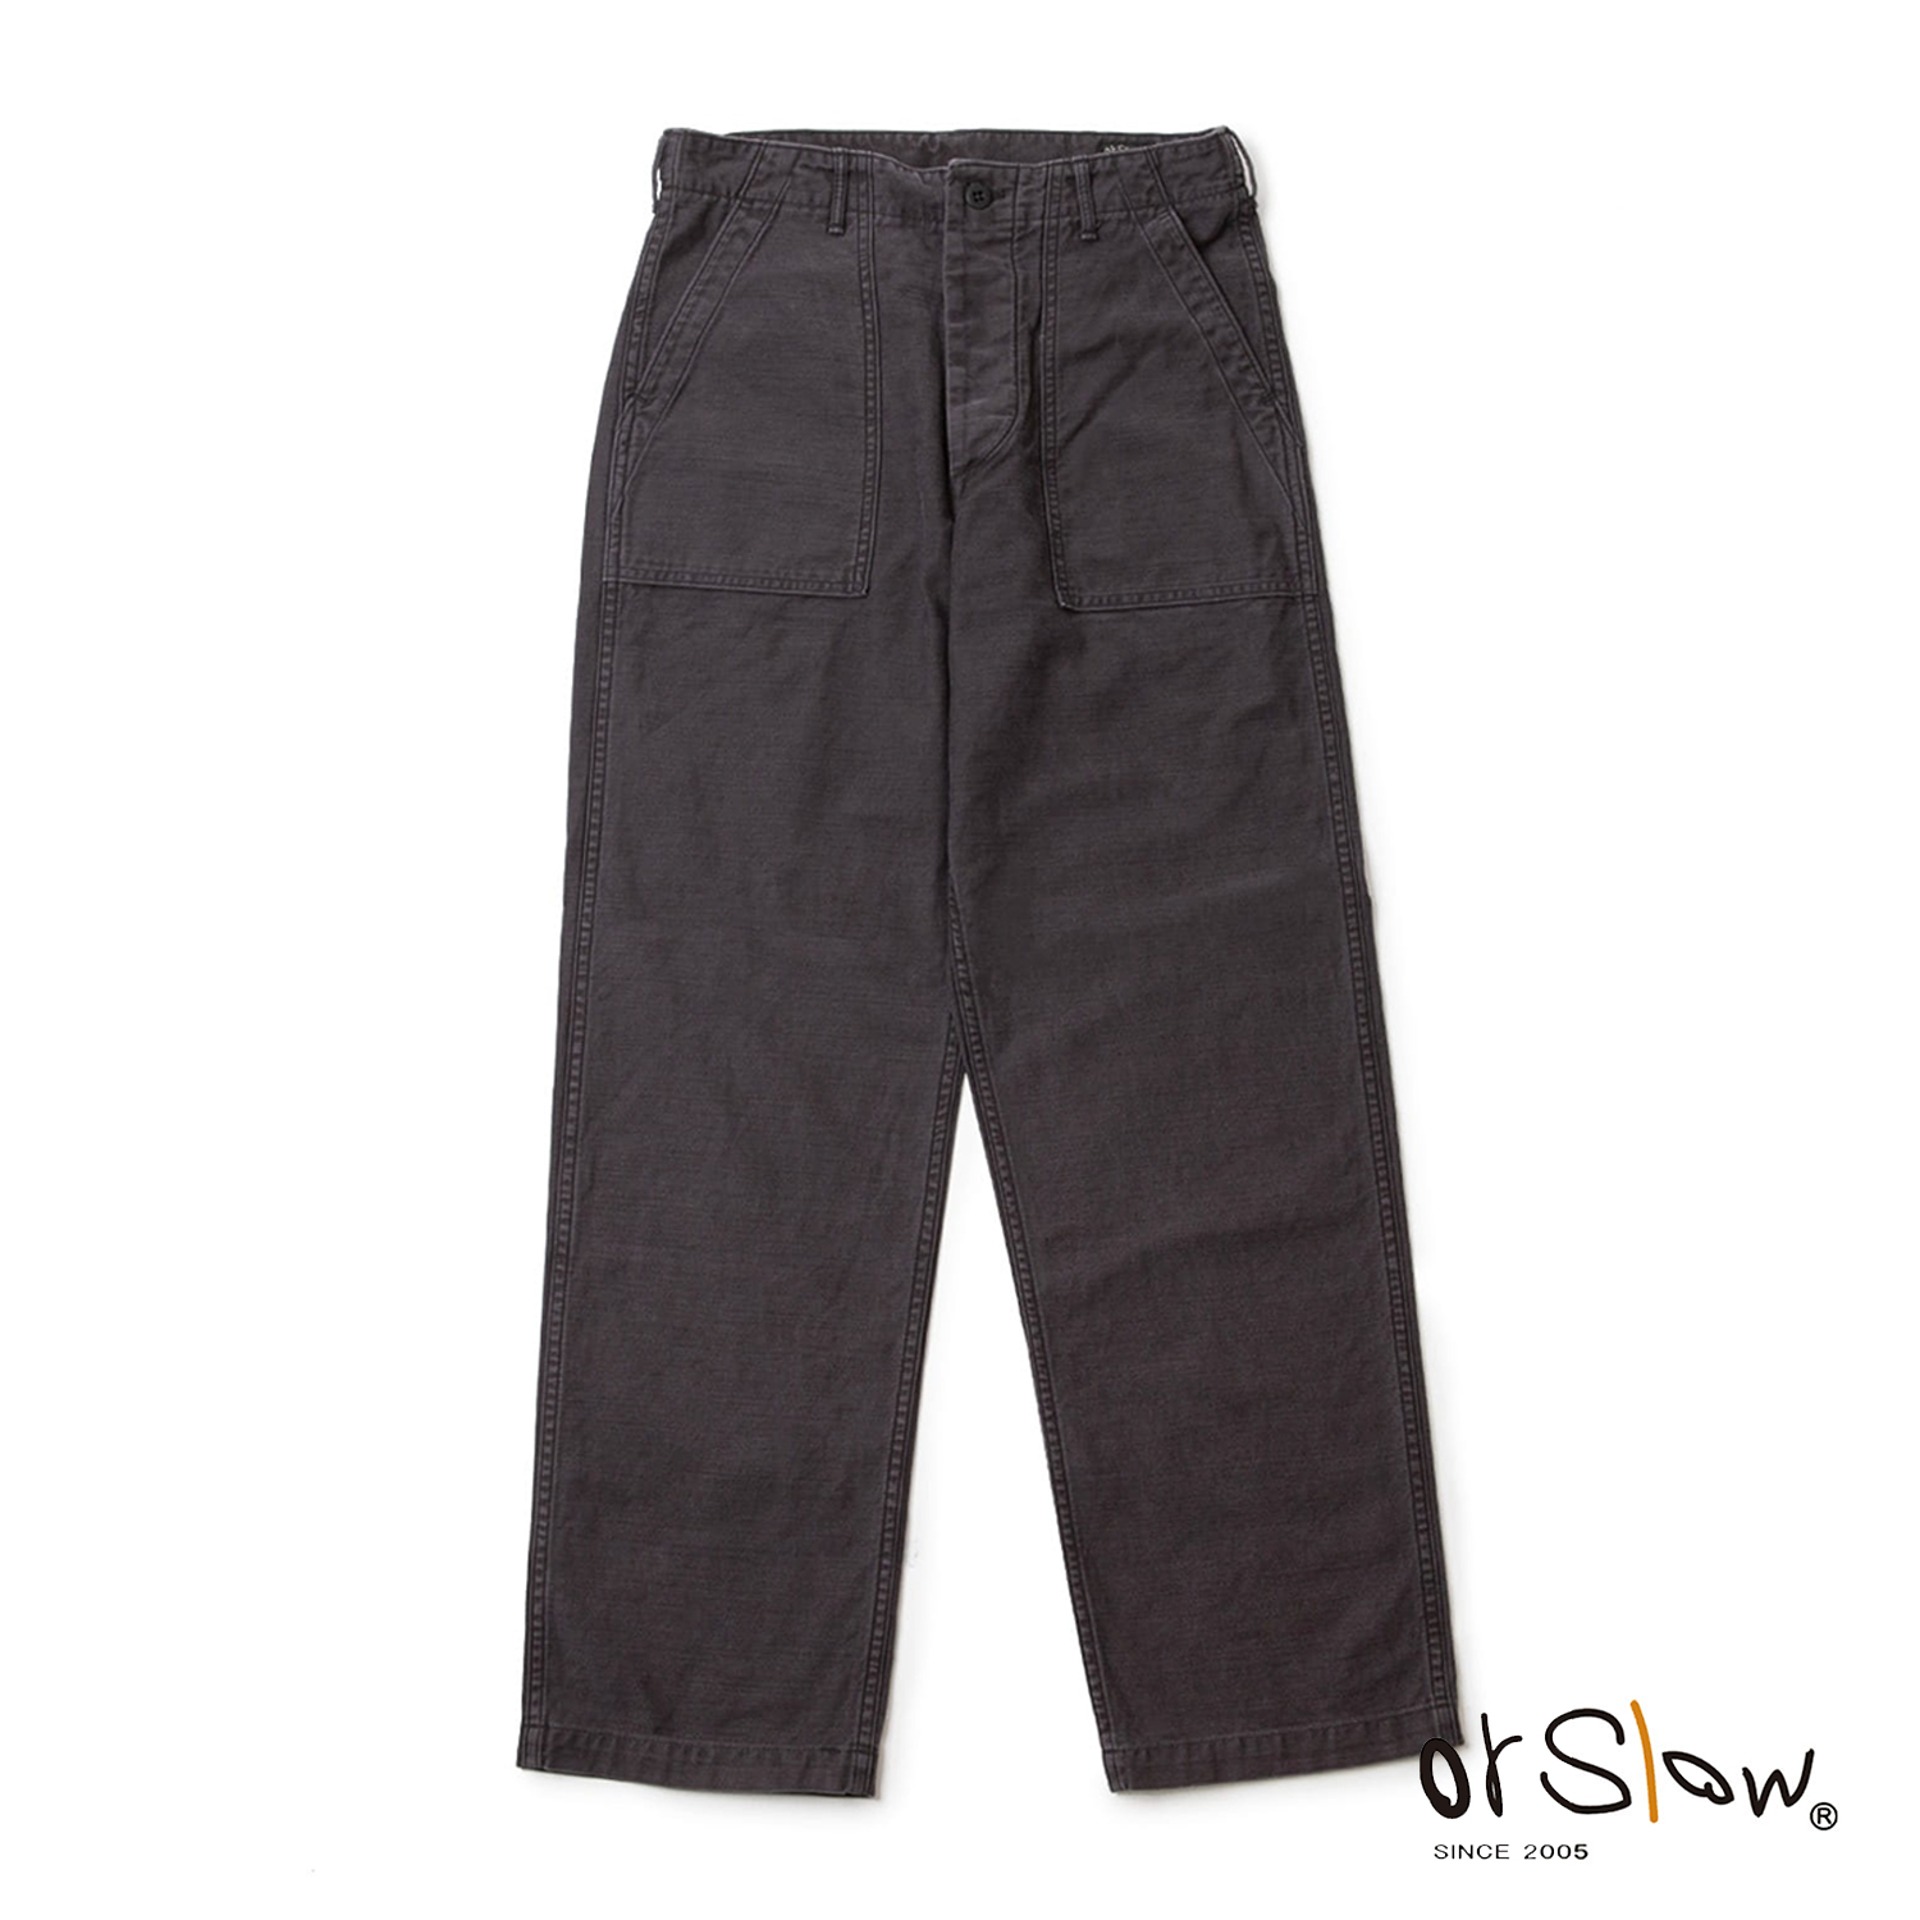 US ARMY FATIGUE PANTS Original Fit (Black Stone Washed)